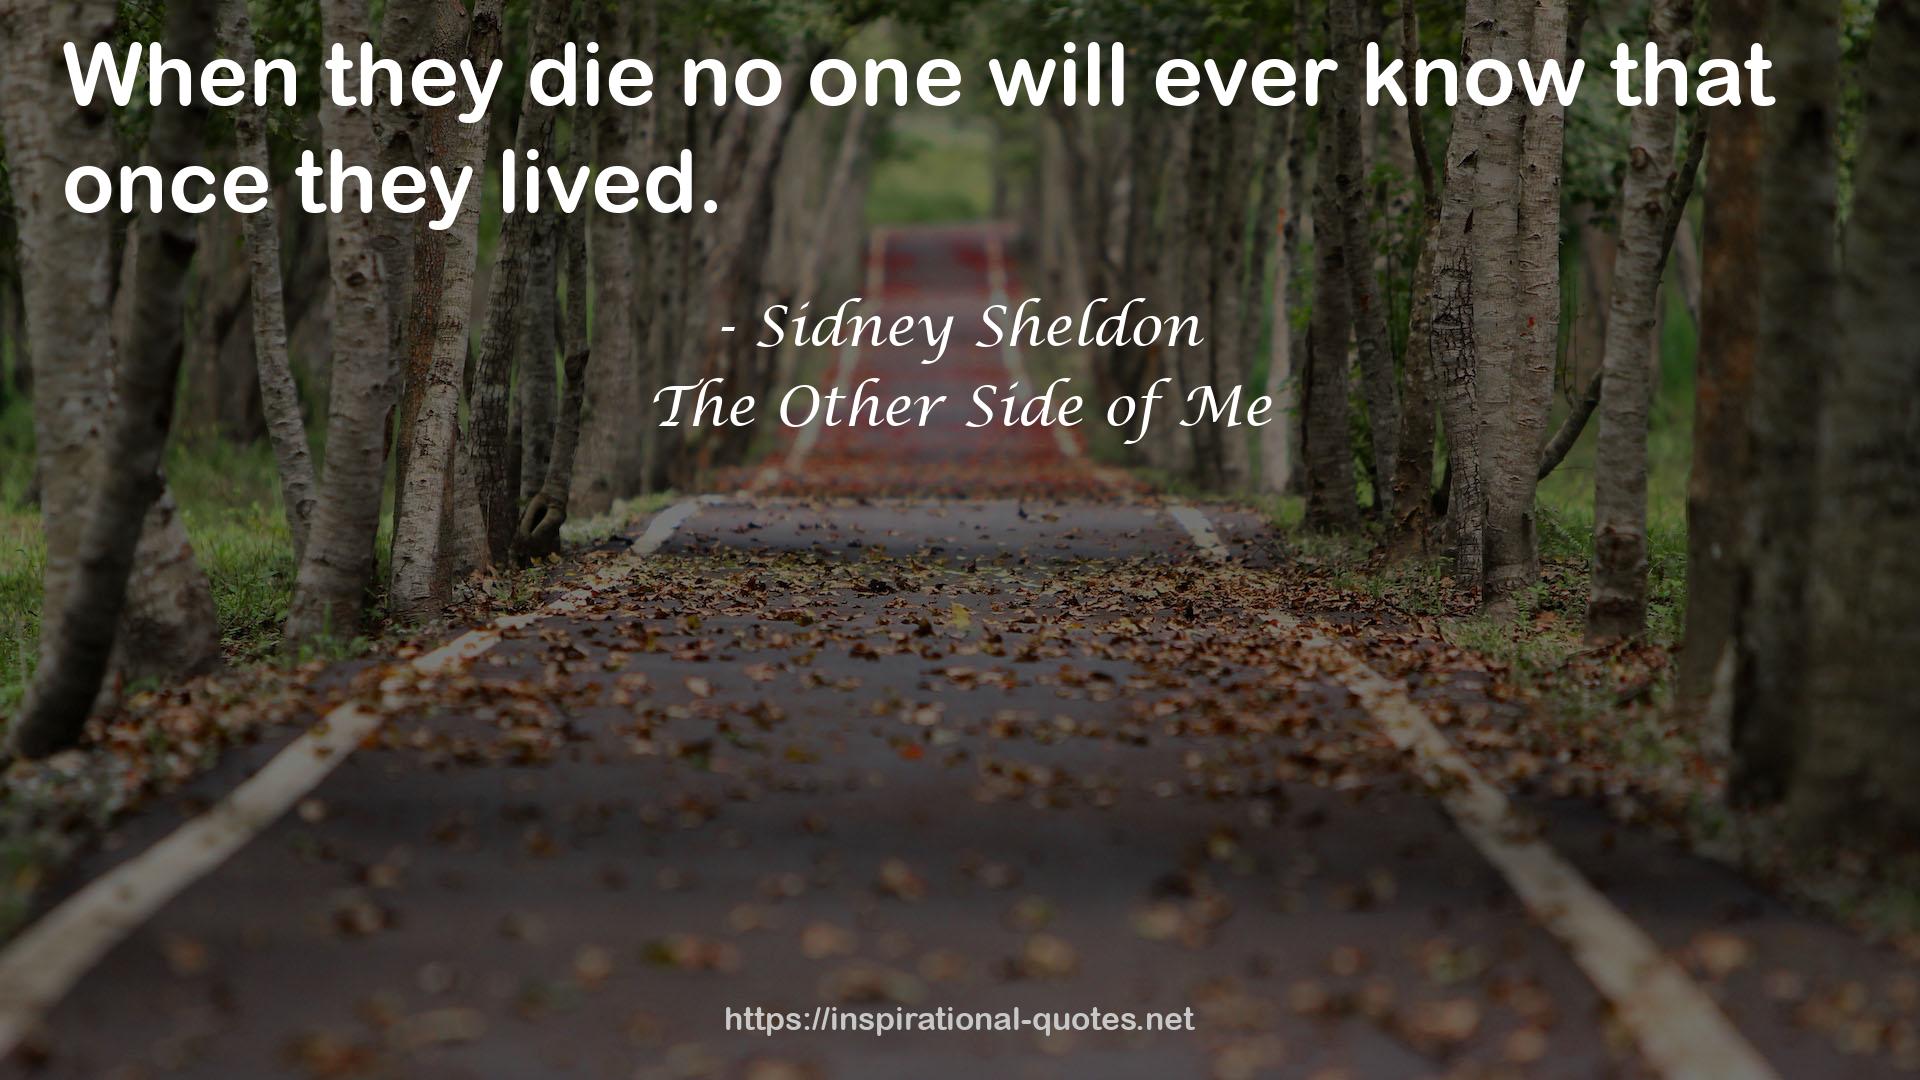 The Other Side of Me QUOTES